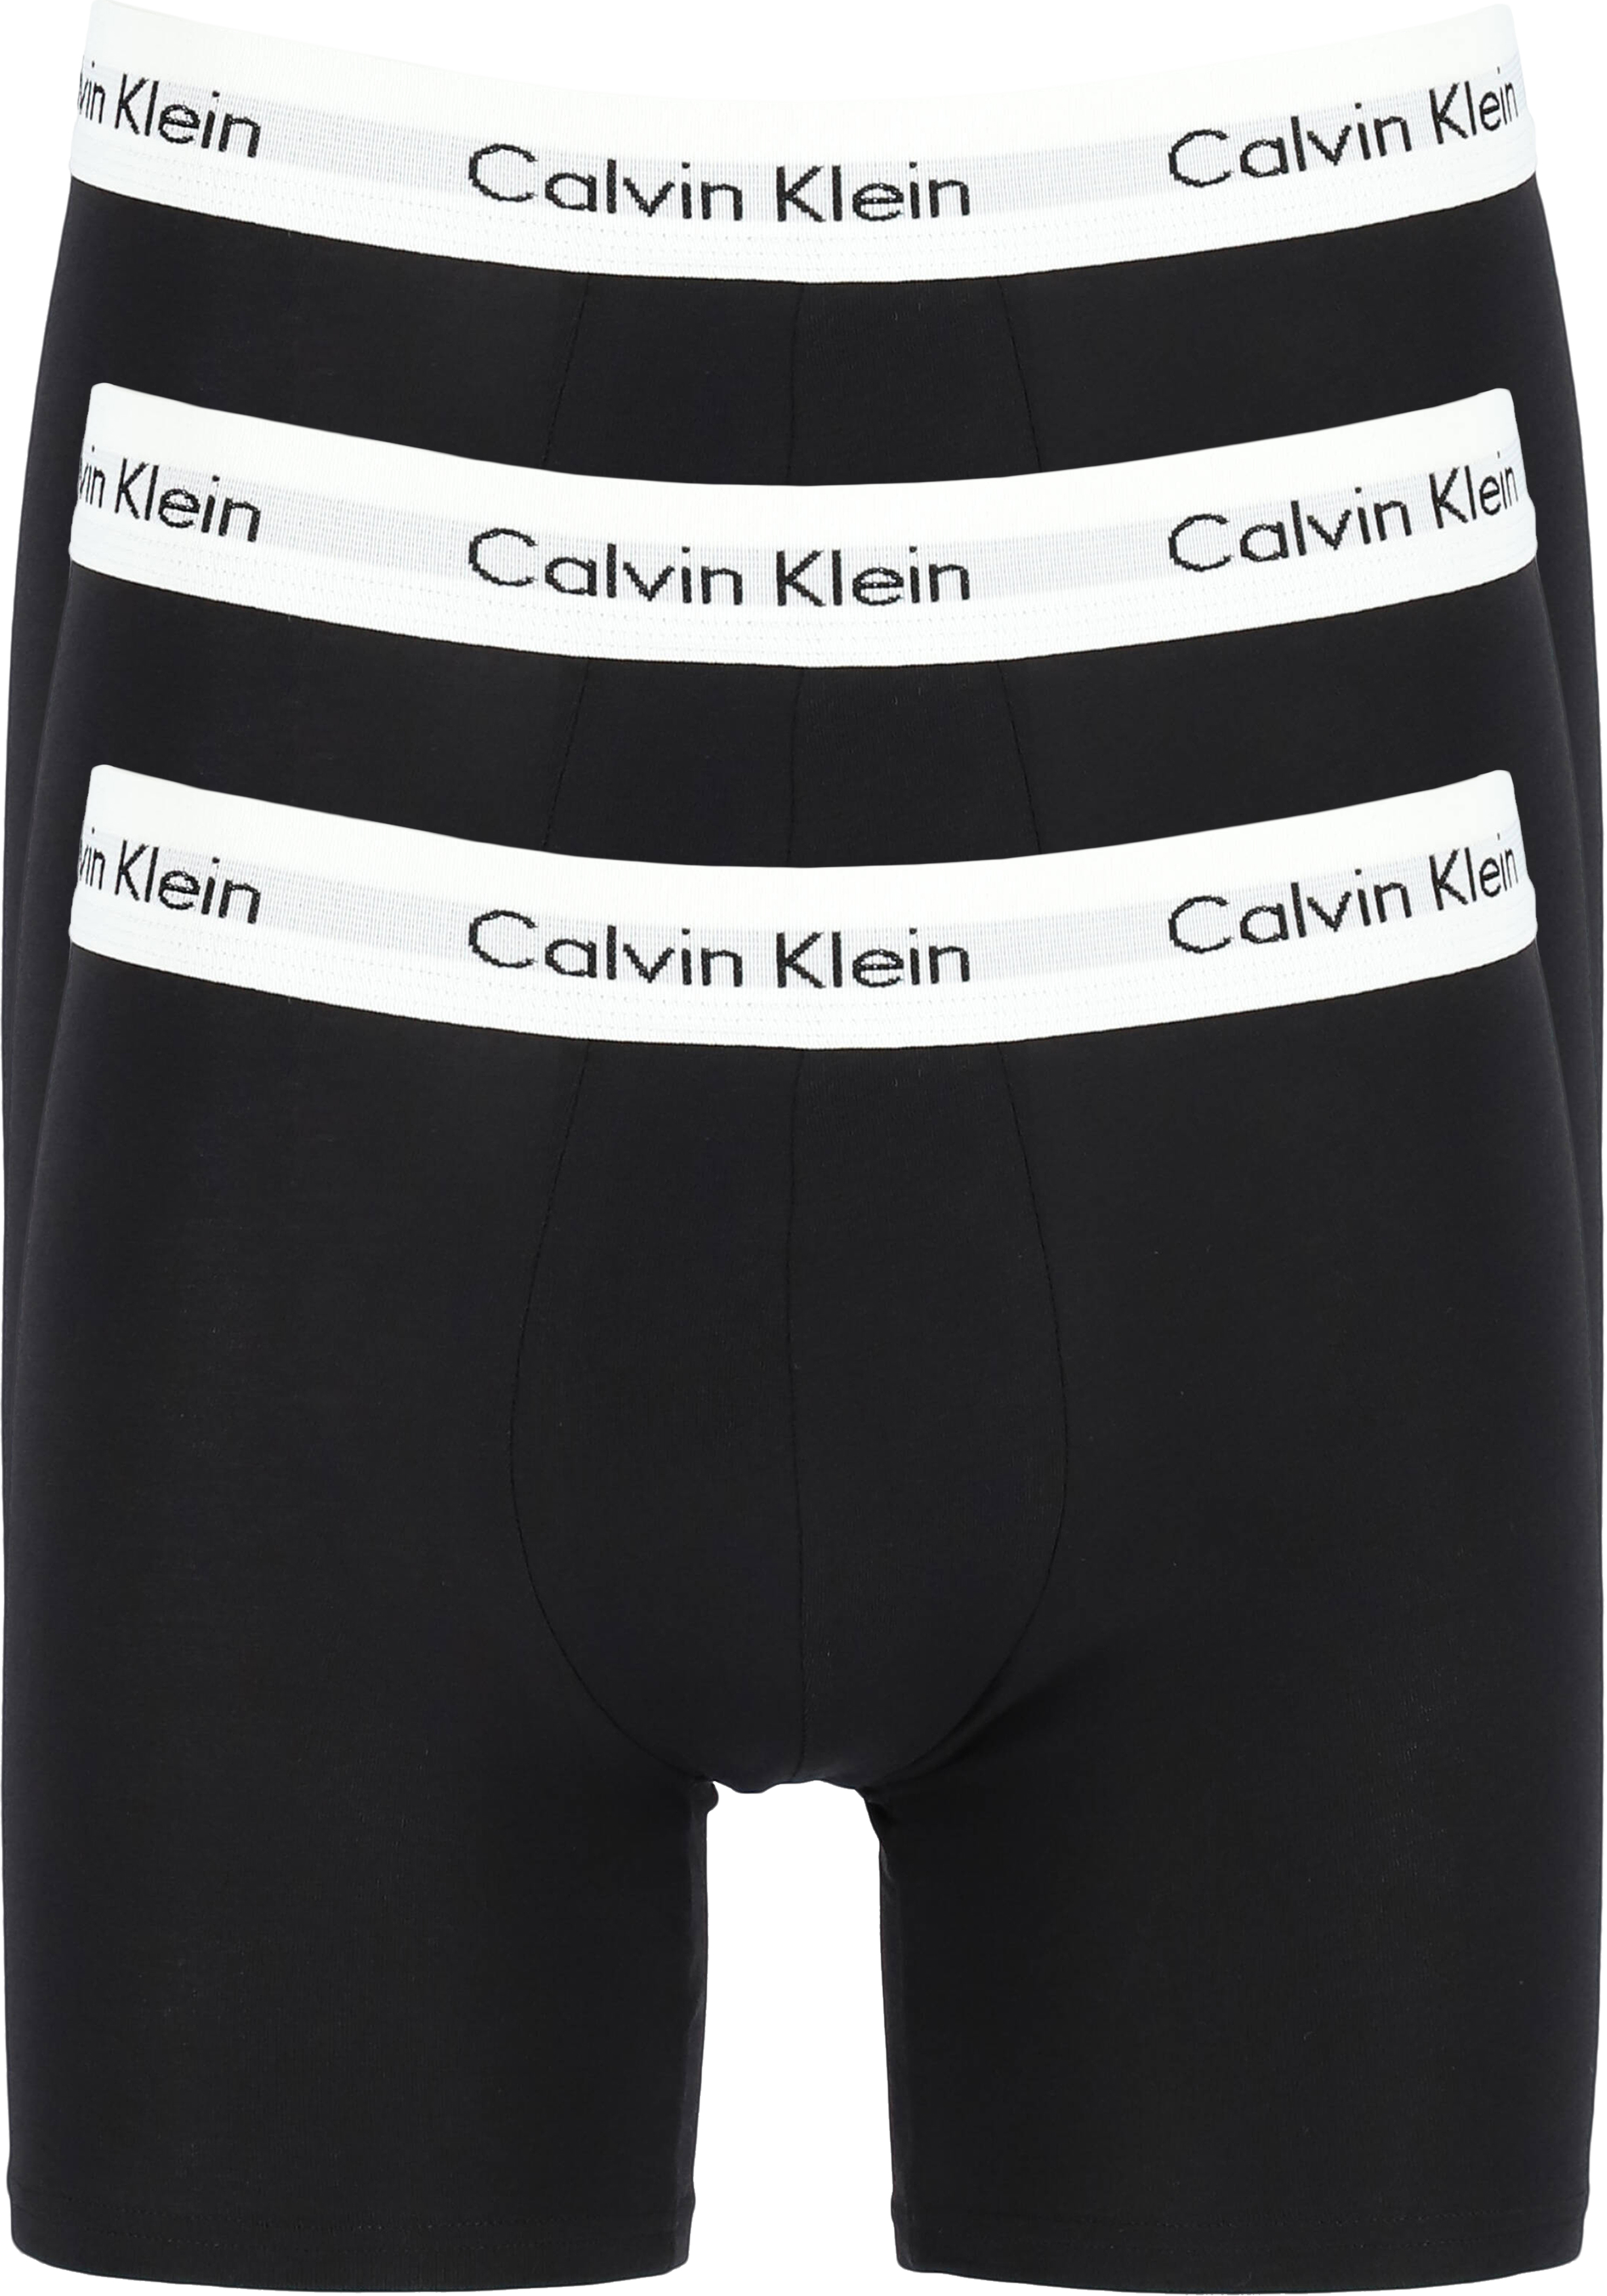 Calvin Klein Cotton Stretch boxer brief (3-pack), heren boxers extra... - Zomer SALE tot 70%